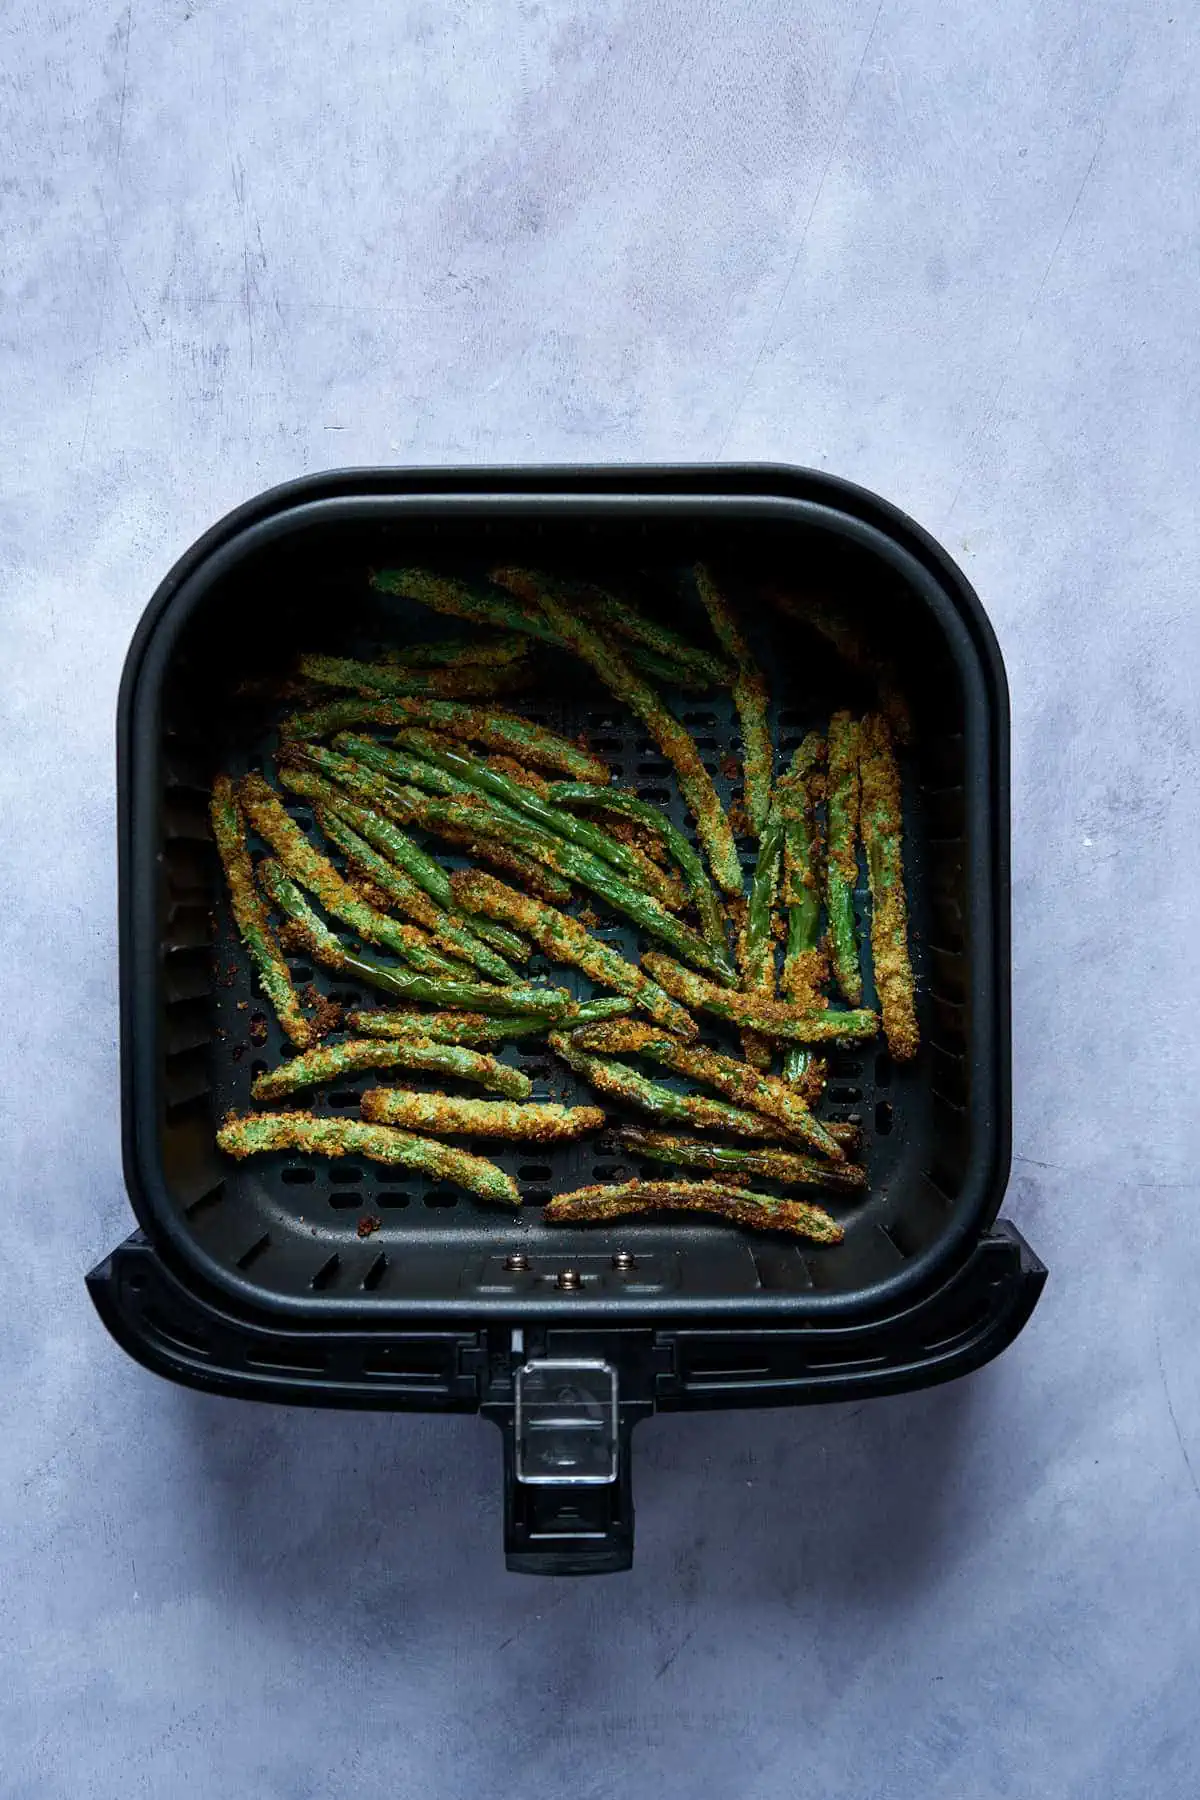 Crunchy green beans fries in the air fryer after cooking.